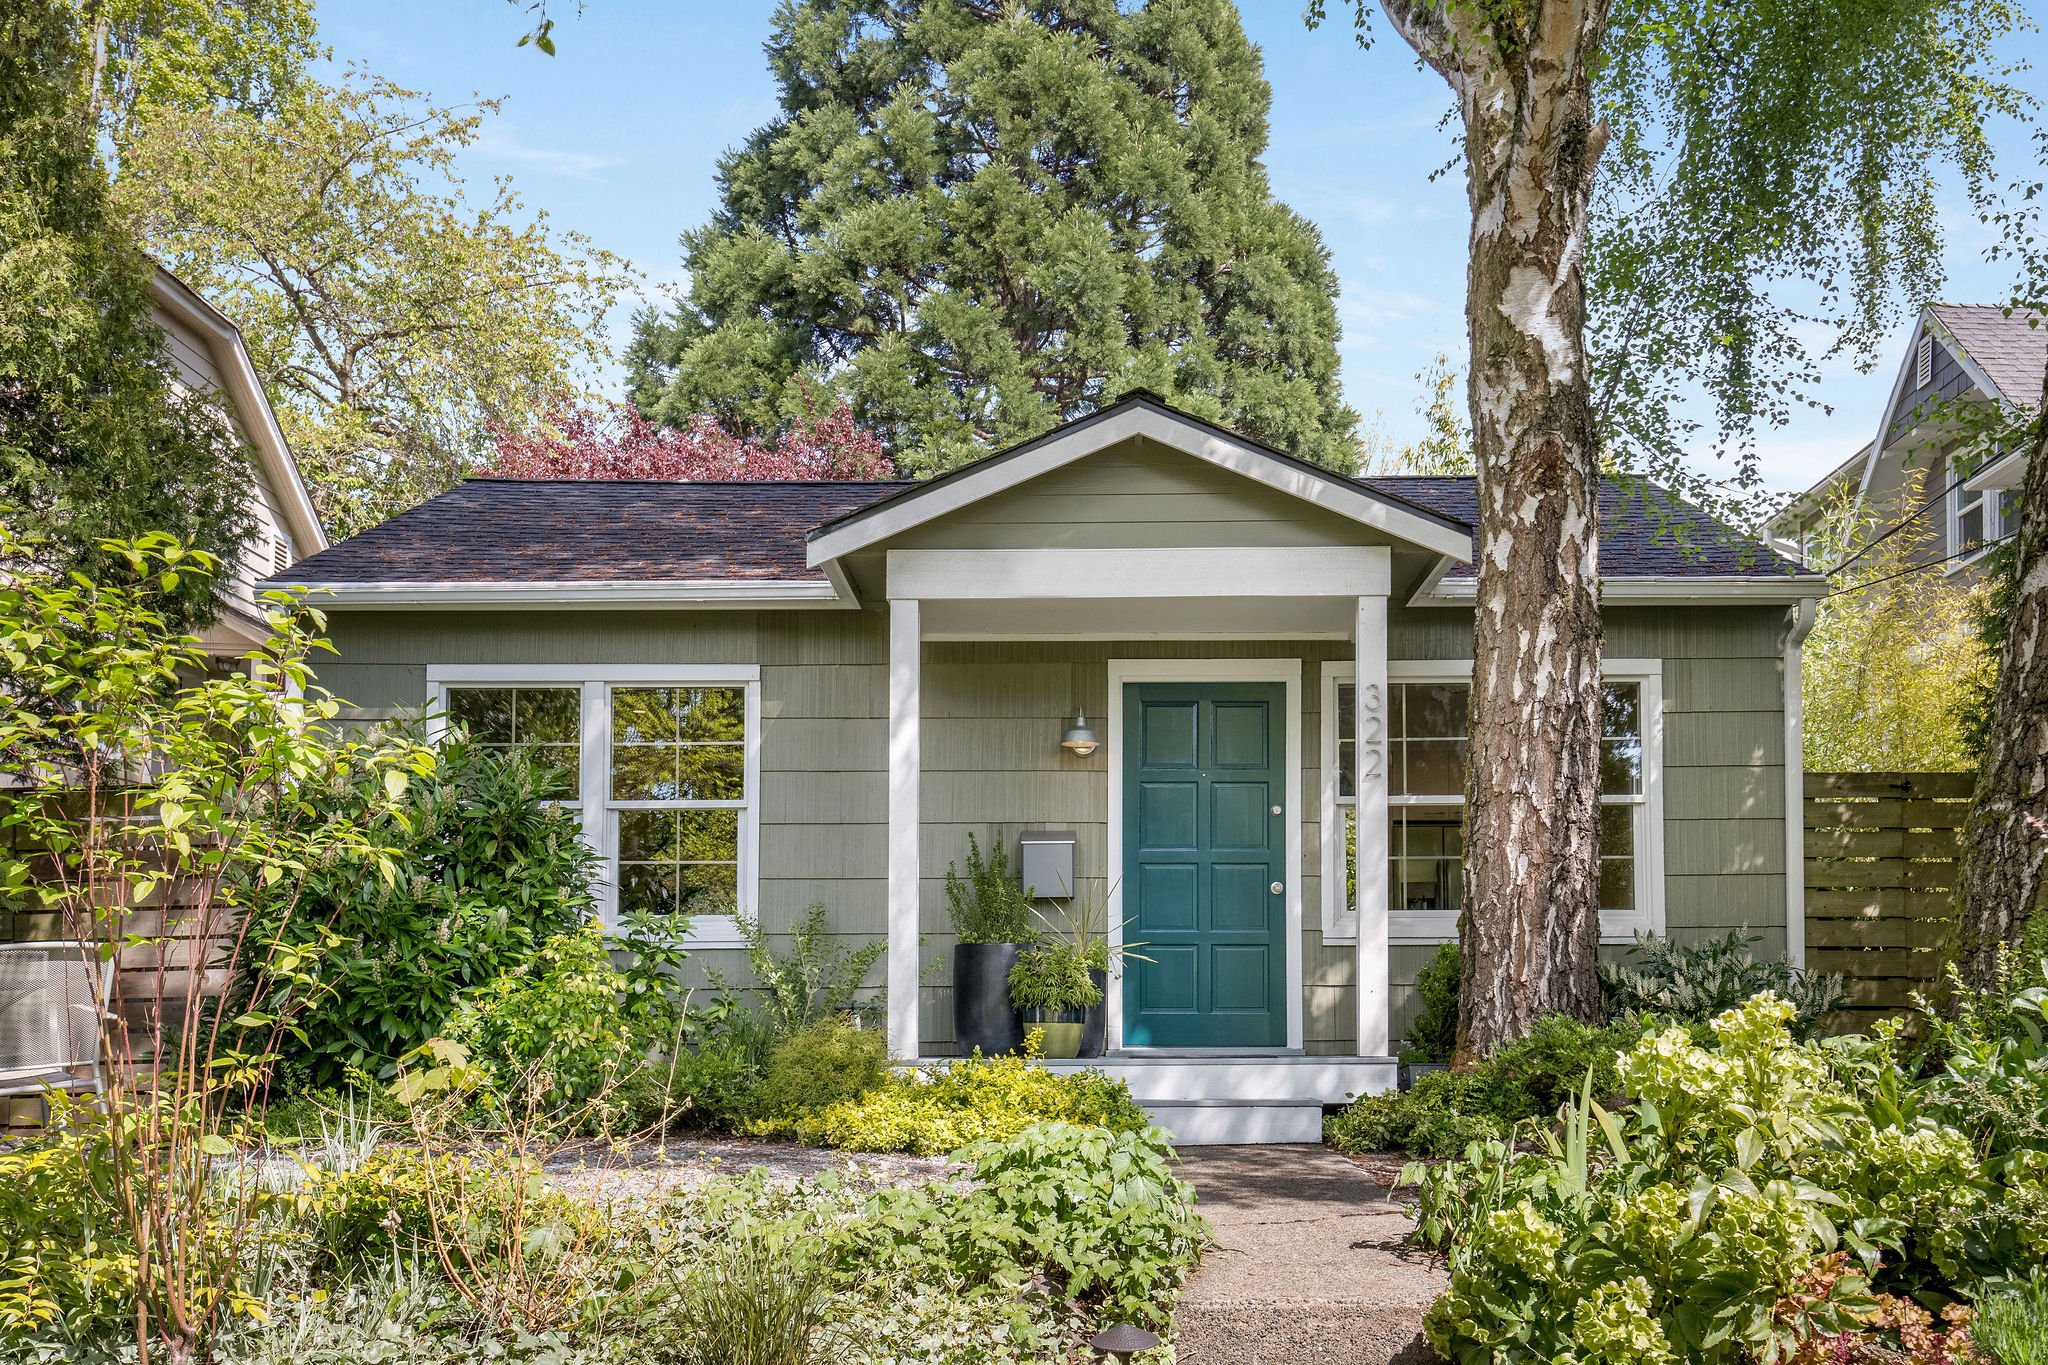  image description: exterior of green one story cottage with garden and yard 